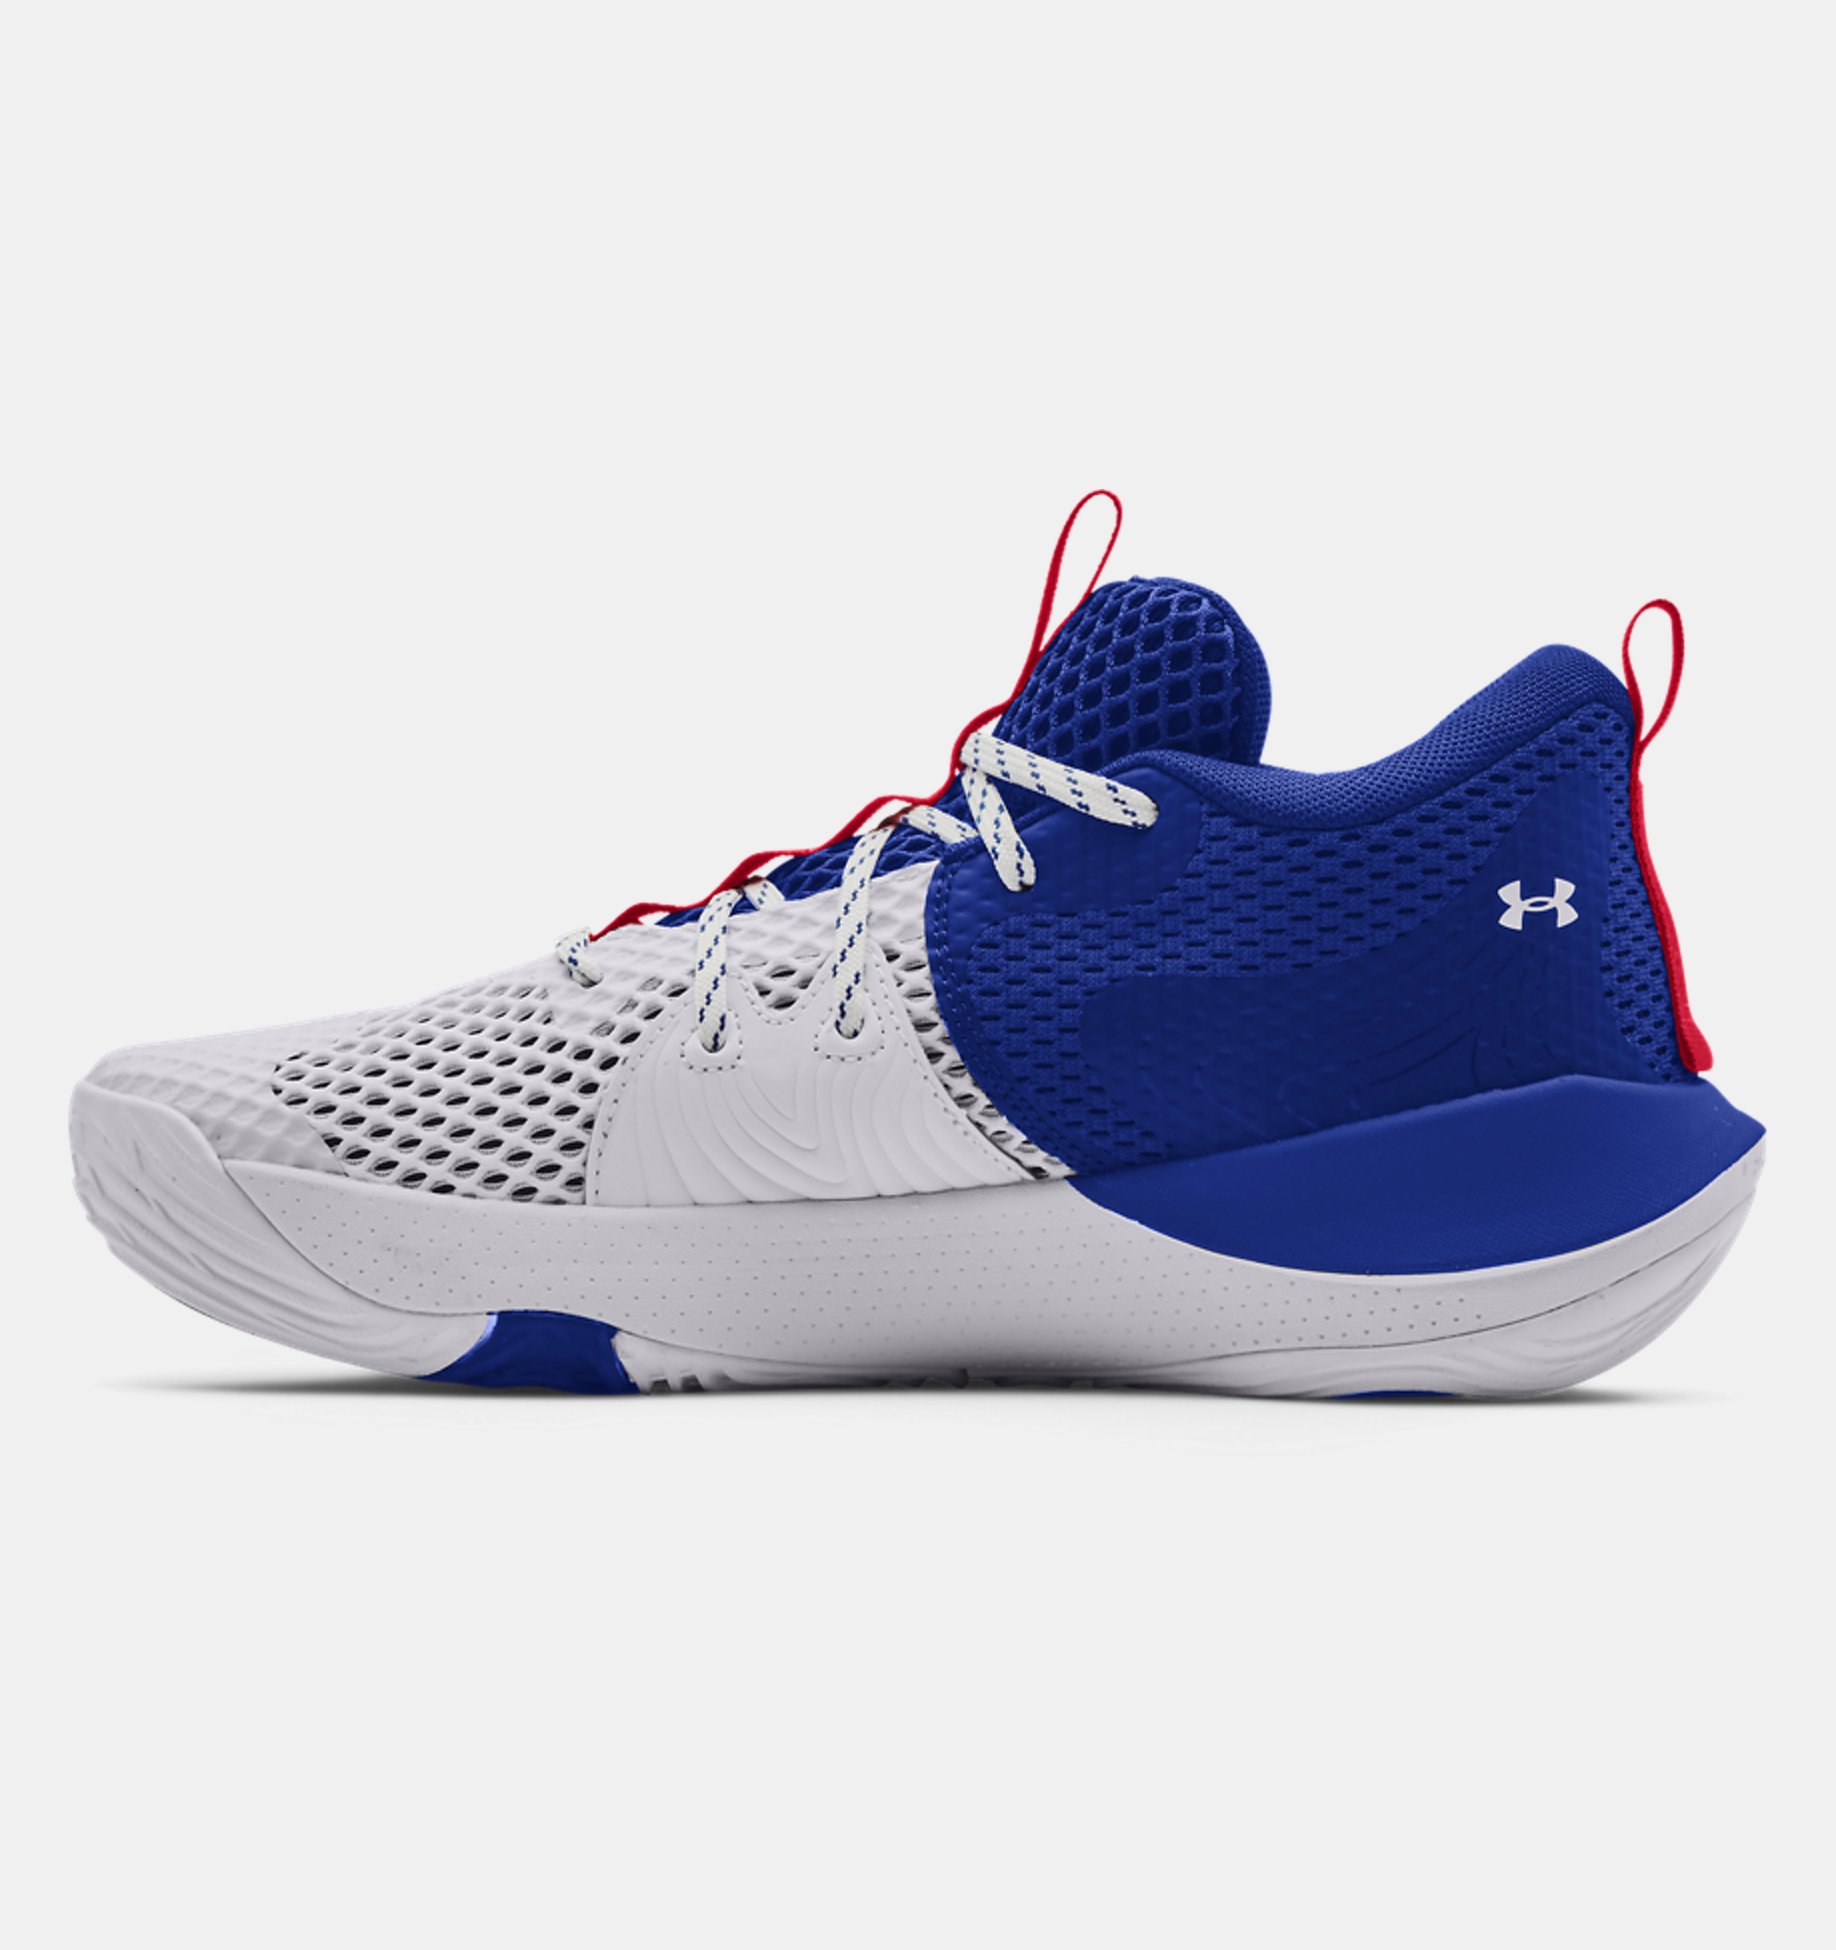 Under Armour Embiid One Lawrence Kansas Red Size 8.5-12 3023086-603 Basketball